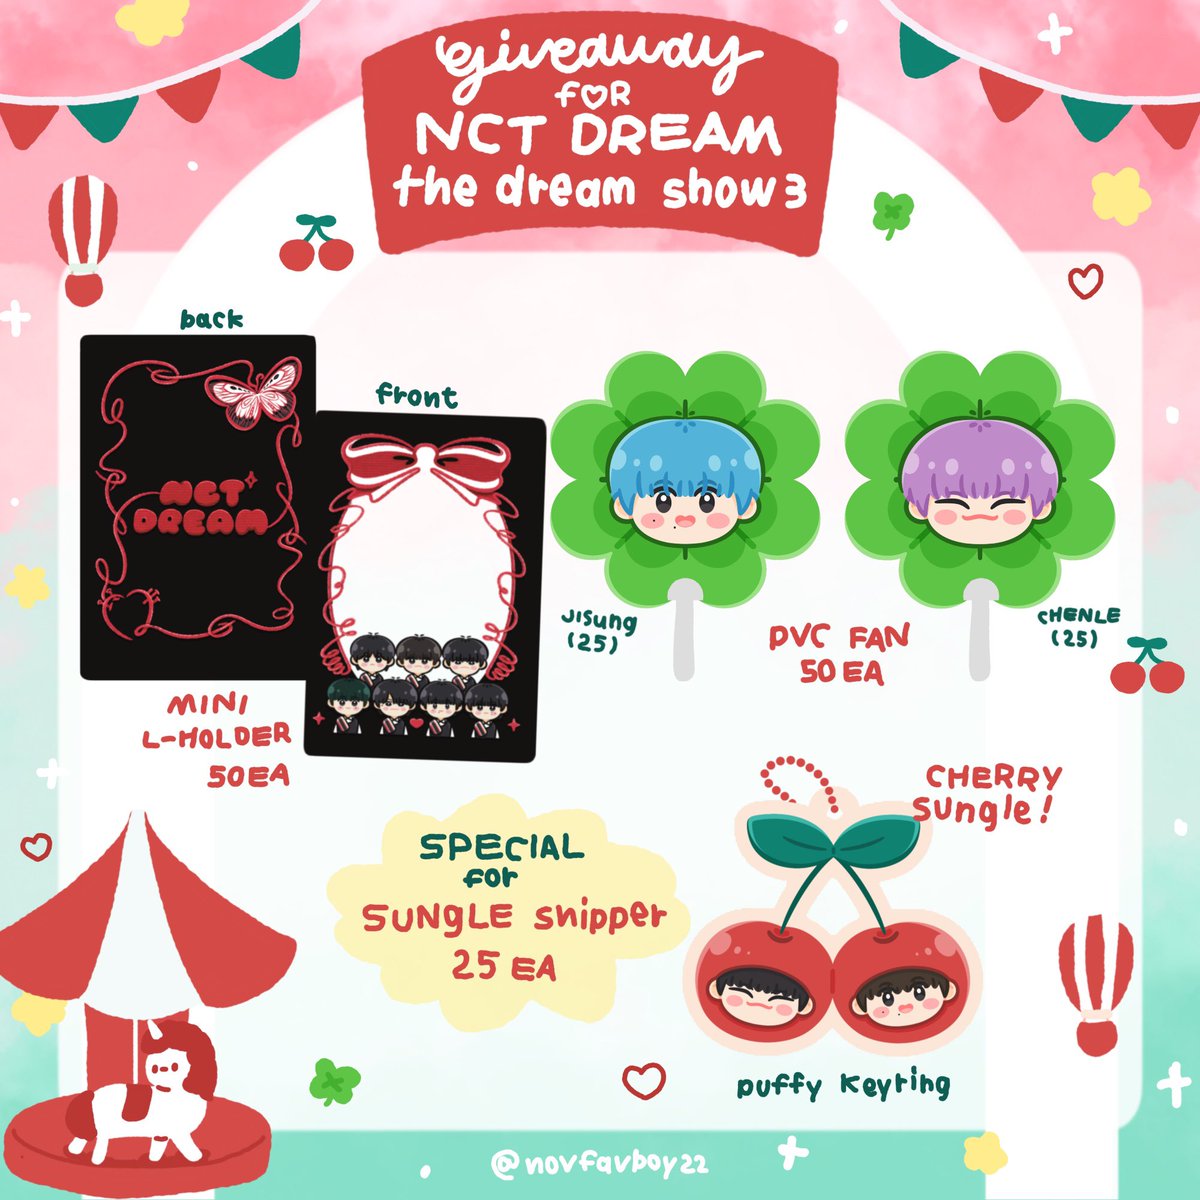 Pls kindly rt 💚🤍🪽

◟✿ Giveaway 
NCT DREAM : The Dream Show3 in BKK ഒ ₊˚

♡ mini L-holder : 50ea/day
♡ PVC fan : 50ea (chenle22, jisung23)

♡ SP for Sungle shipper!
   🍒Puffy keyring 25 ea only !

มารับเด็กๆกันนะคะ 🥺🙏🏻

#NCTDREAM_THEDREAMSHOW3_BANGKOK…